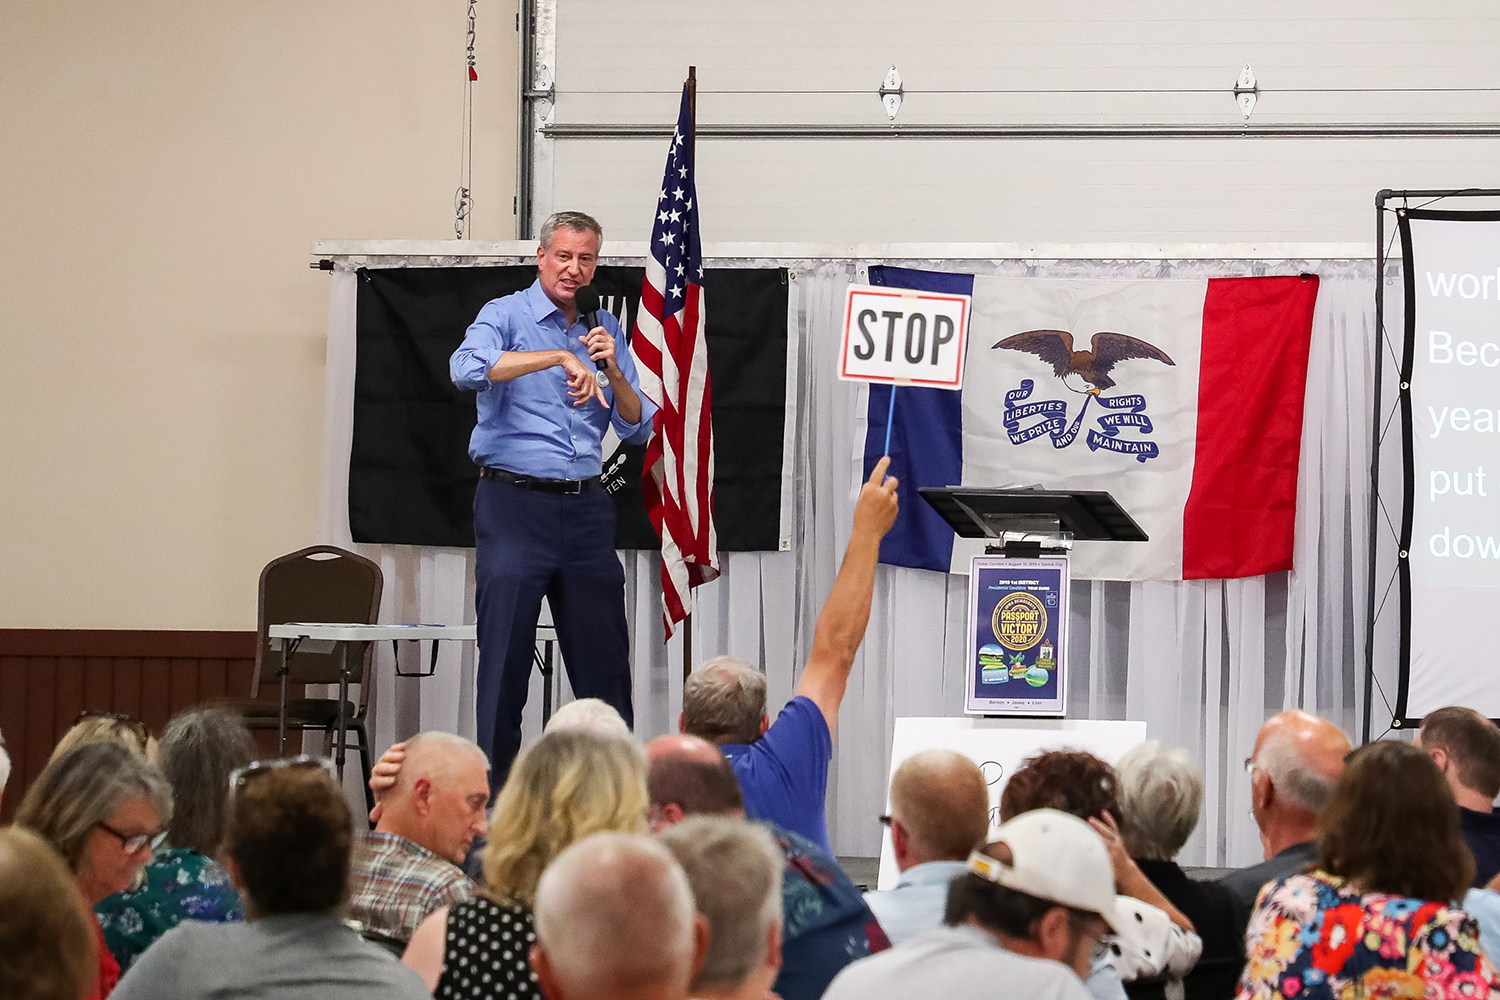  New York City Mayor Bill de Blasio speaks at the 1st District Democrats Passport to Victory rally at the Linn County Fairgrounds on Saturday, Aug. 10, 2019.  